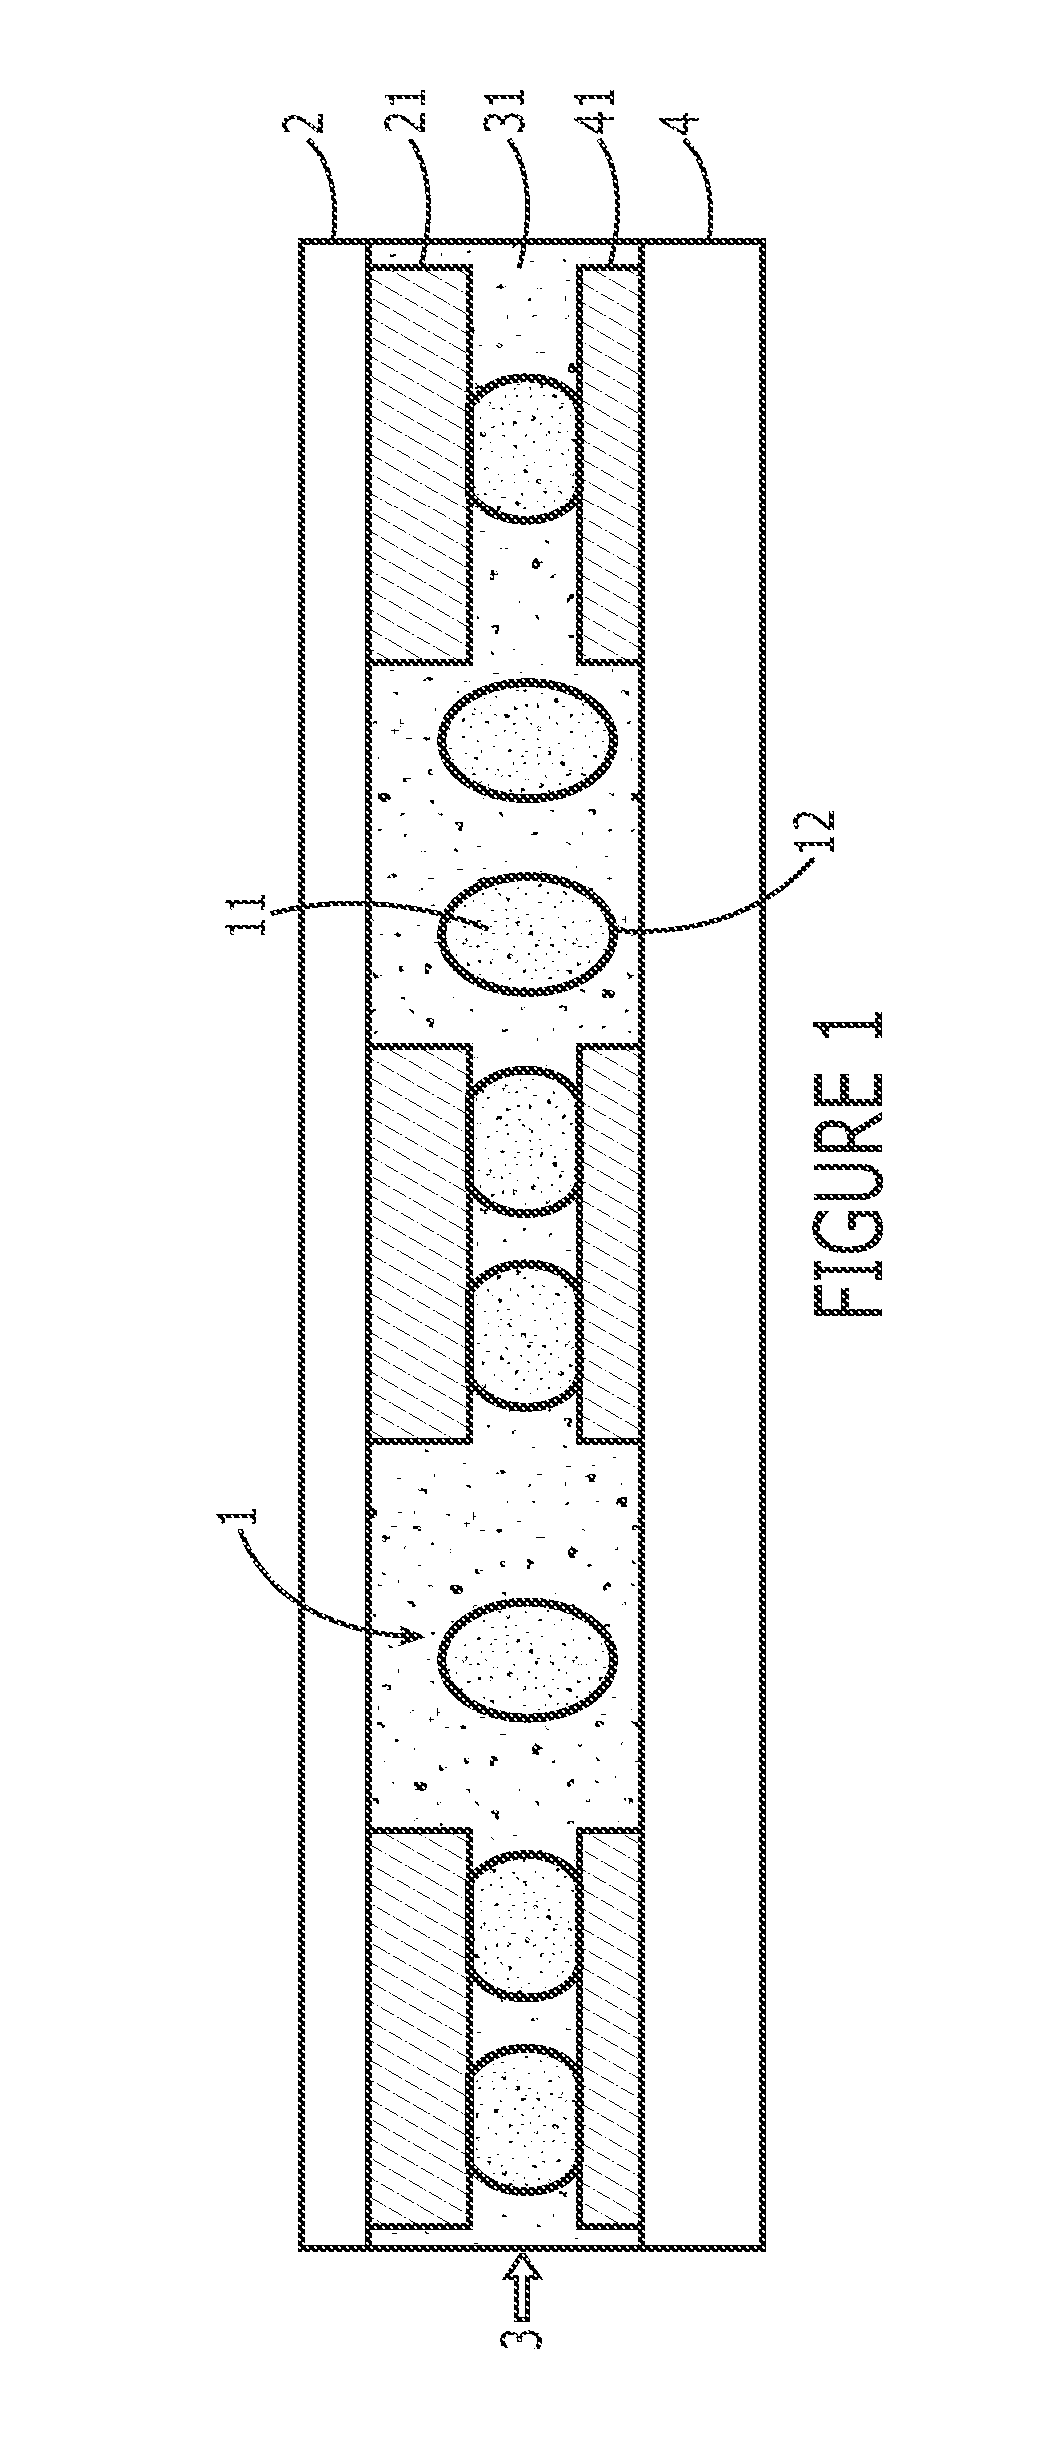 Polymer Particles and Conductive Particles Having Enhanced Conducting Properties, and Anisotropic Conductive Packaging Materials Containing the Same